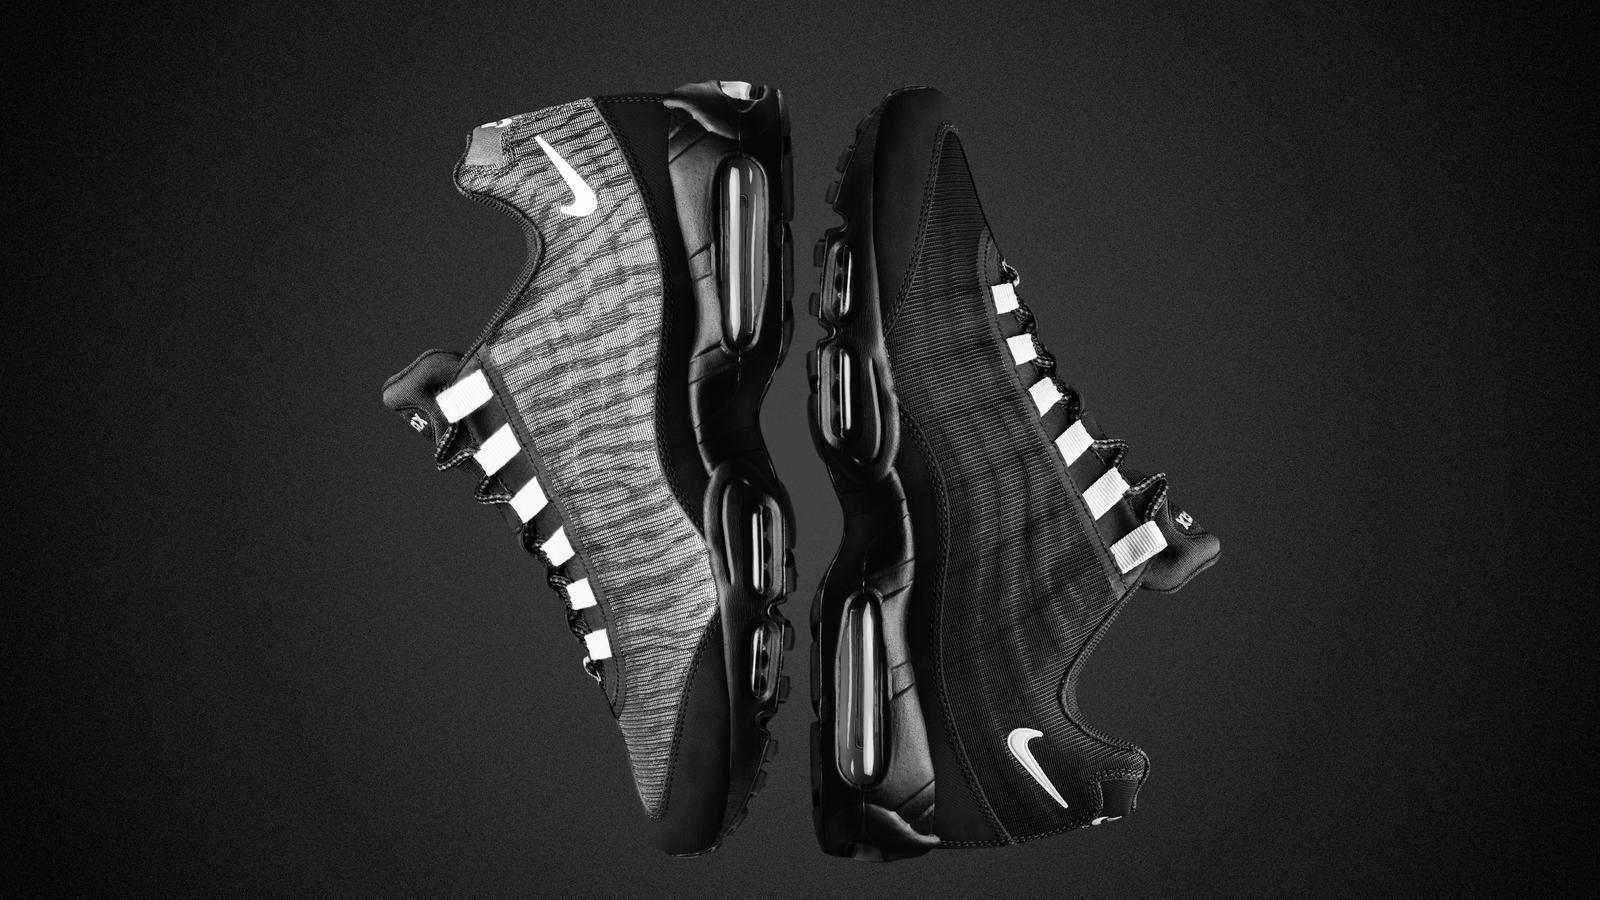 The Nike Air Max Reflect Collection: One Shoe, Both Sides